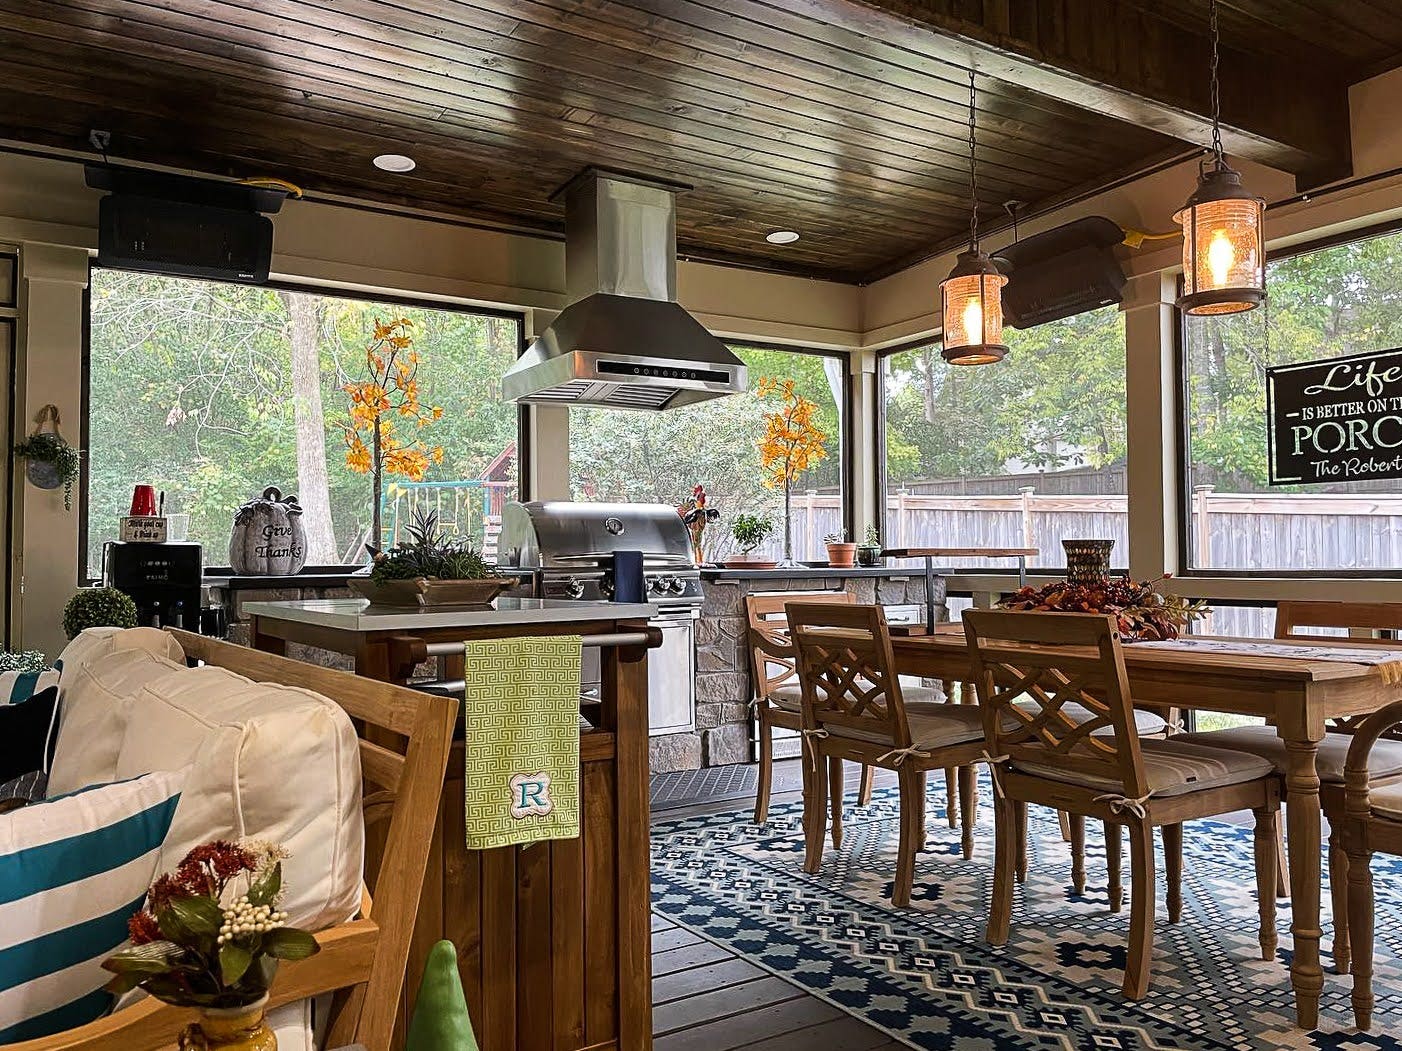 Rustic Meets Modern Grilling: Proline hood keeps the air clear in this inviting outdoor kitchen. Whimsical lighting and earthy tones create a charming space for grilling. Leafy surroundings add a touch of natural serenity. - Proline Range Hoods - prolinerangehoods.com 